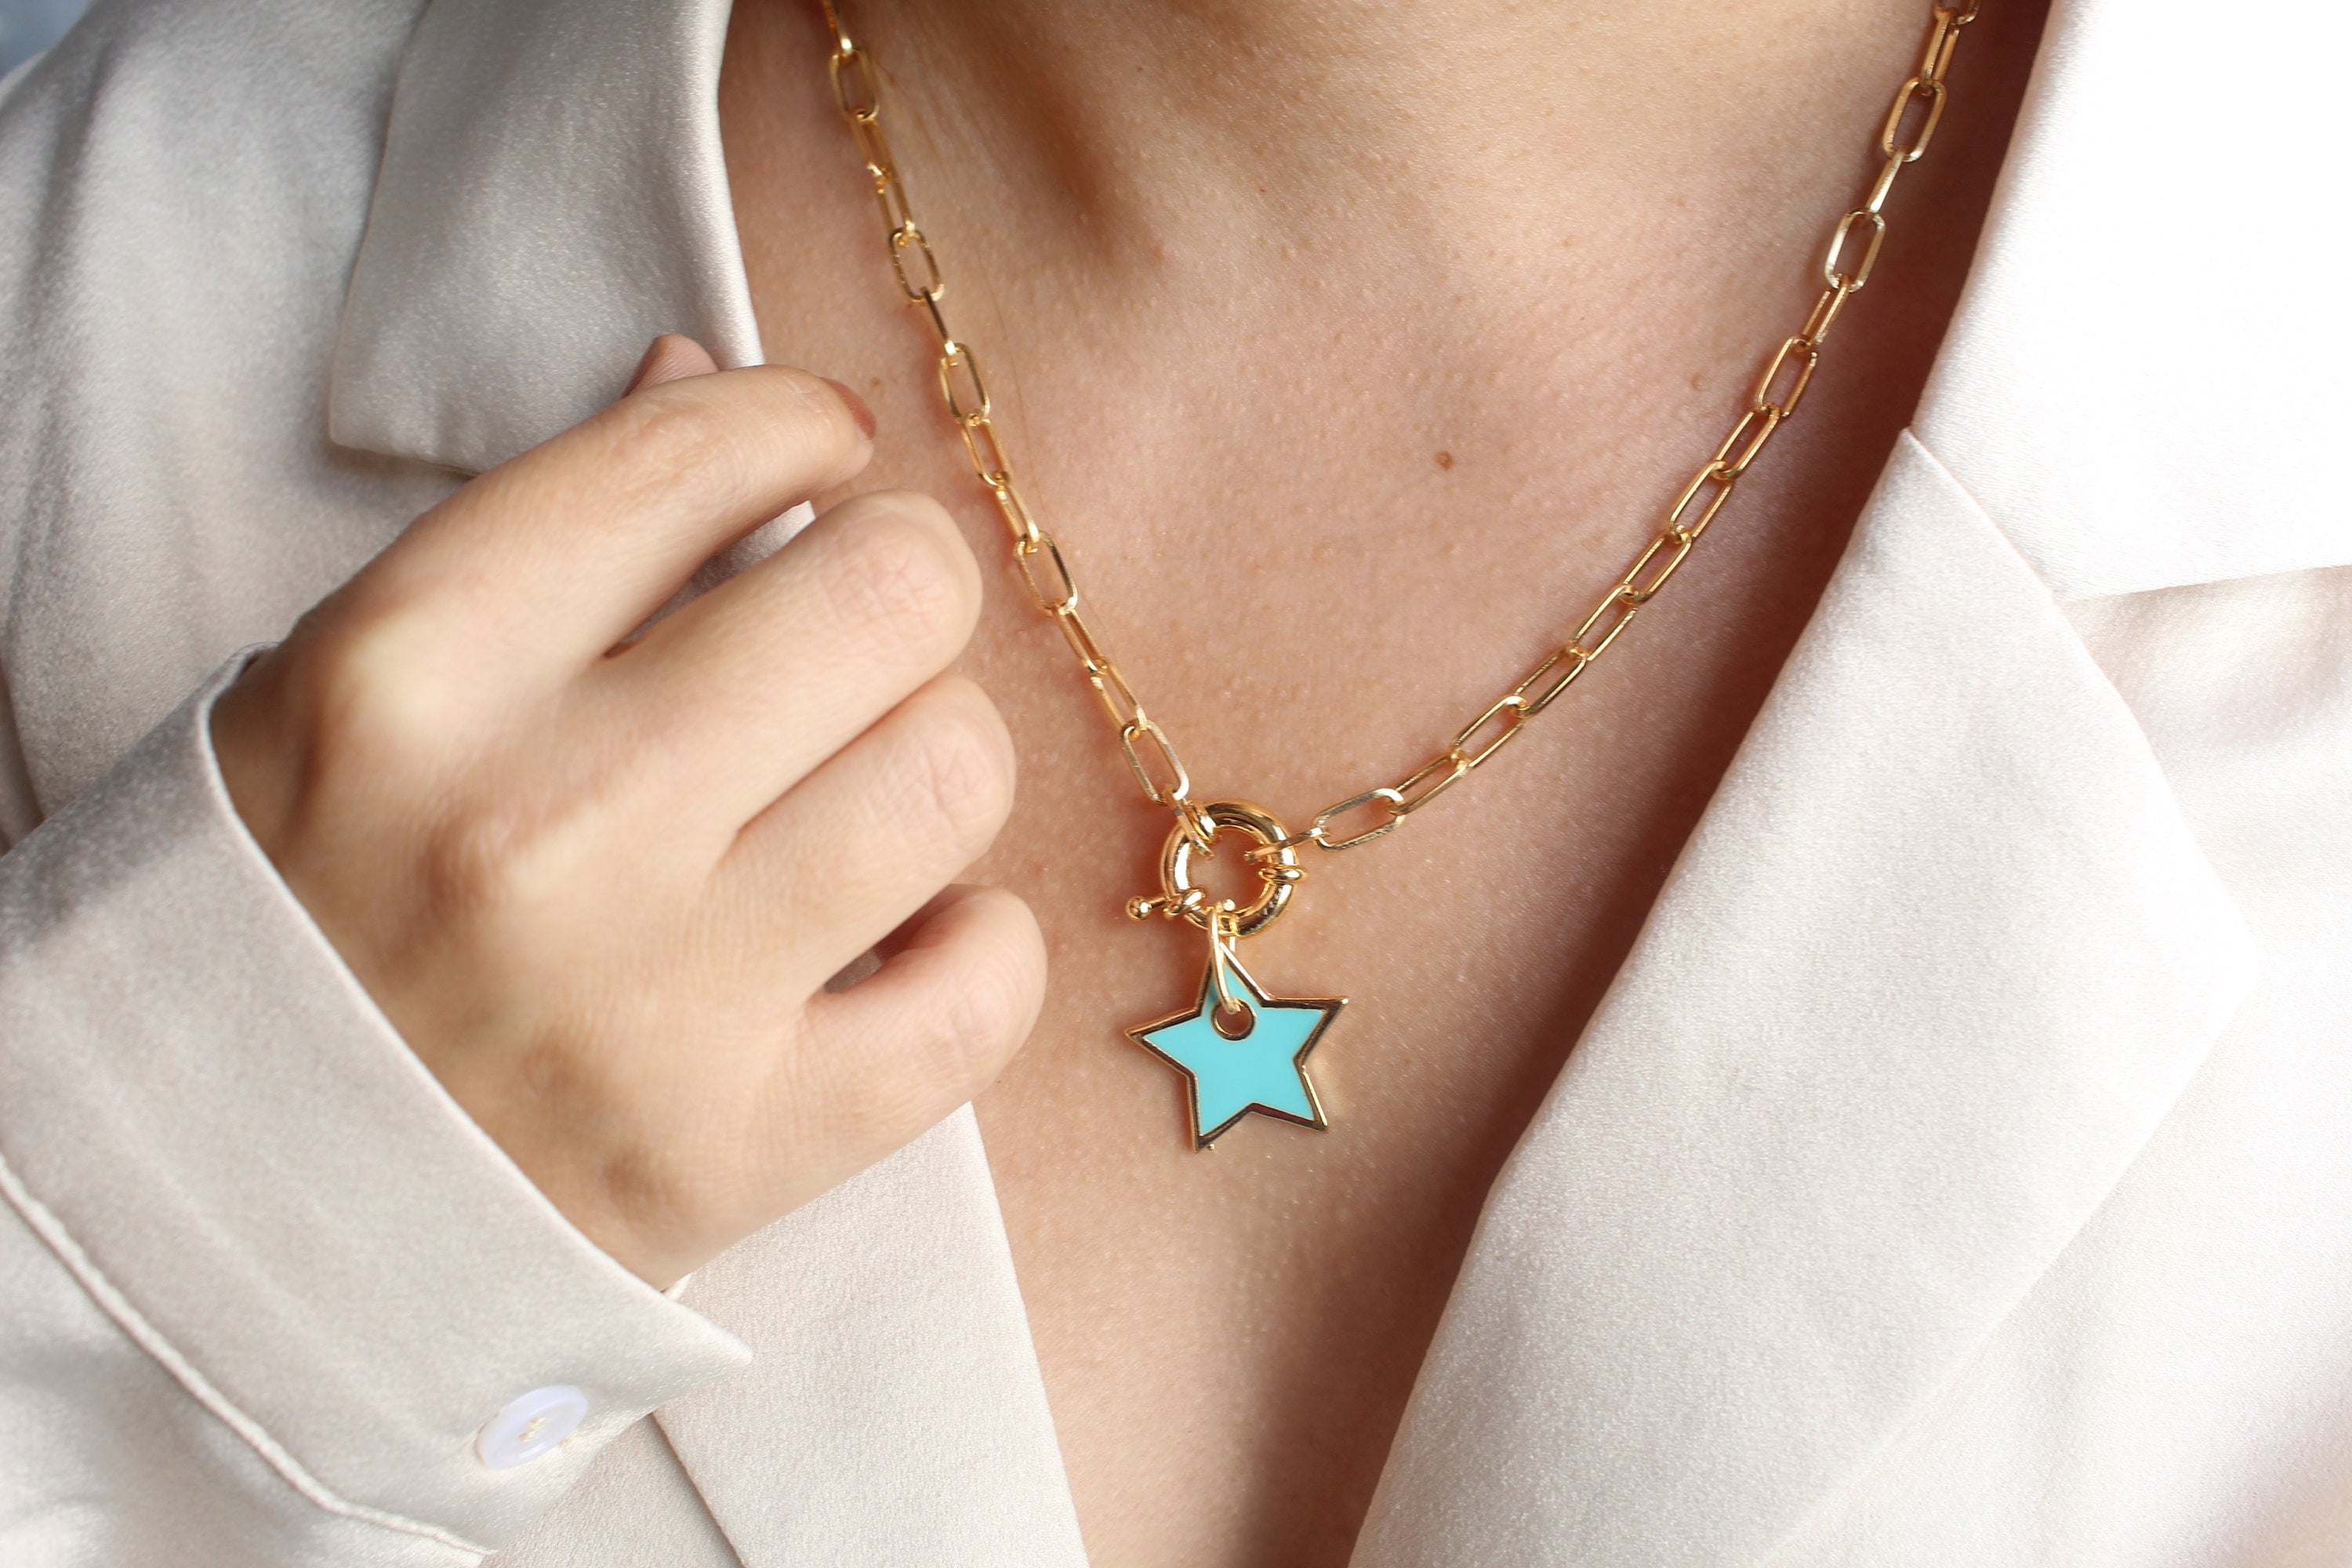 Star Necklace Gold, Paperclip Chain, Gift for her, Dainty Enamel jewelry,  Best Friends trendy necklace, New year gift, New Year Gift Idea